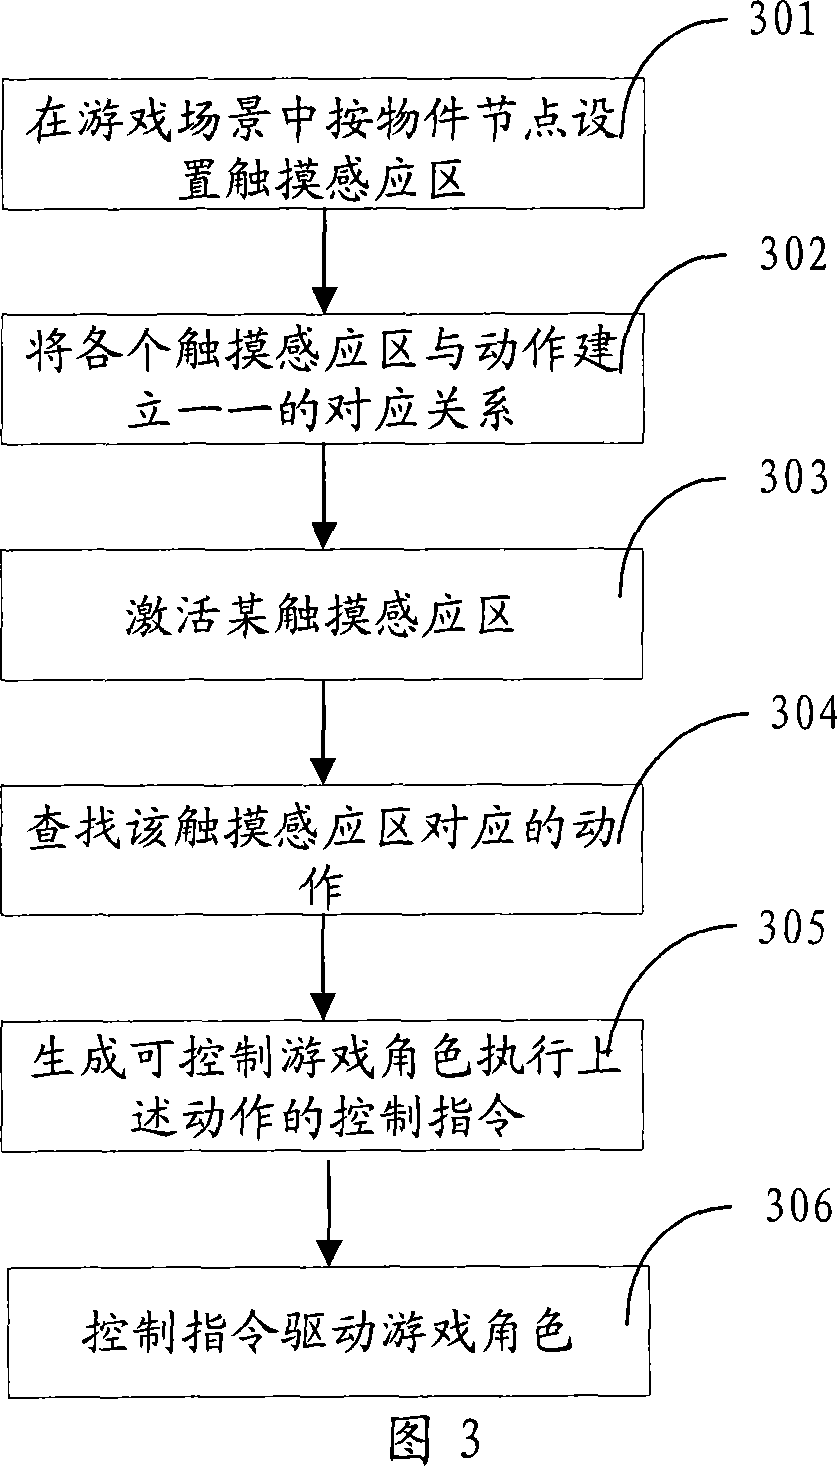 Control method and system for computer game